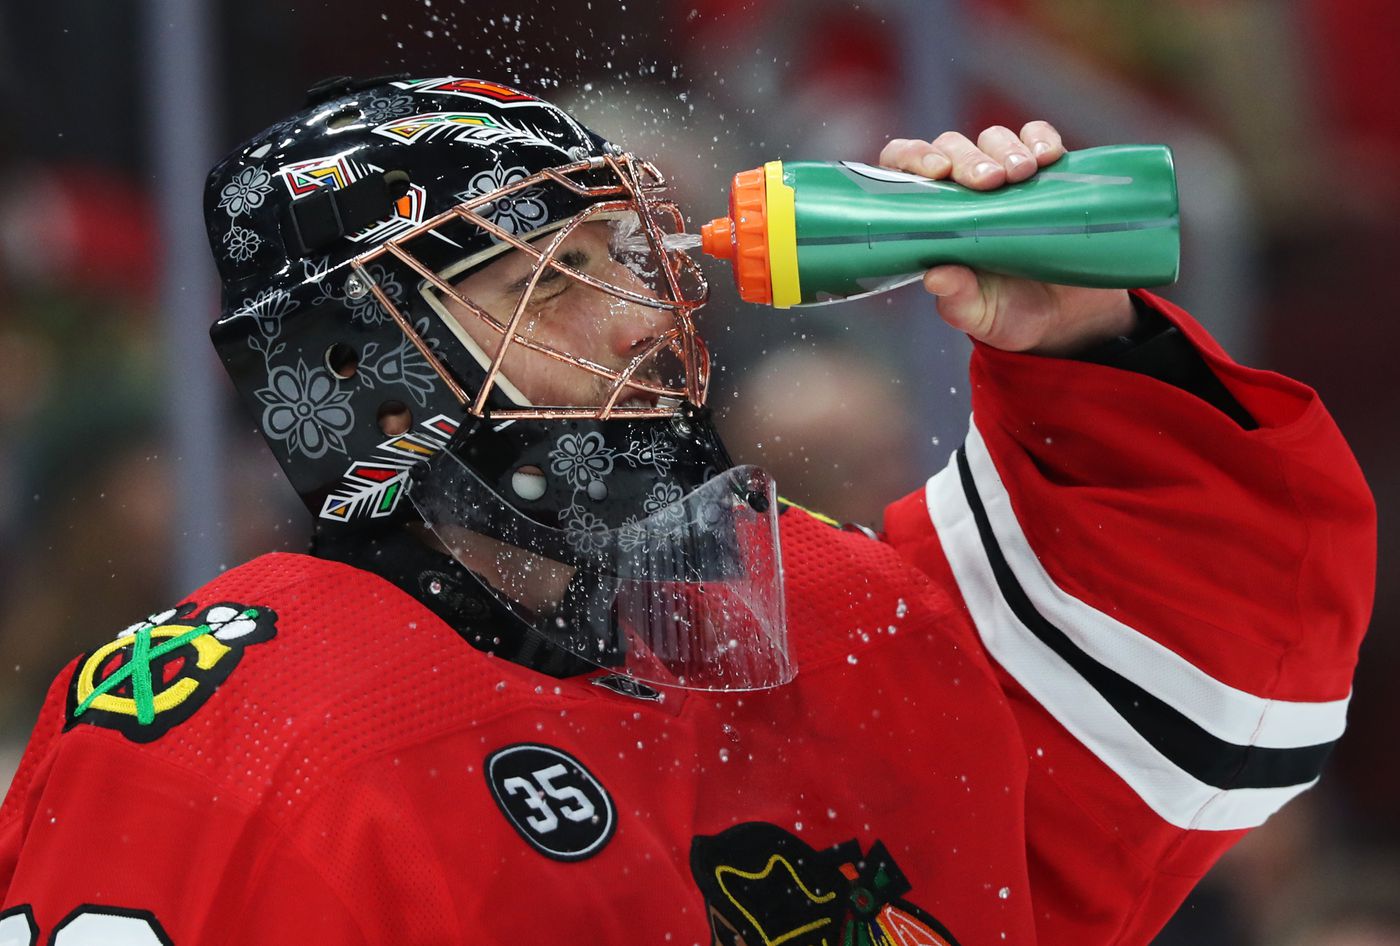 Chicago Blackhawks goaltender Marc-Andre Fleury (29) sprays water on his face during a break in the second period against the Montreal Canadiens at United Center on Jan. 13, 2022, in Chicago.